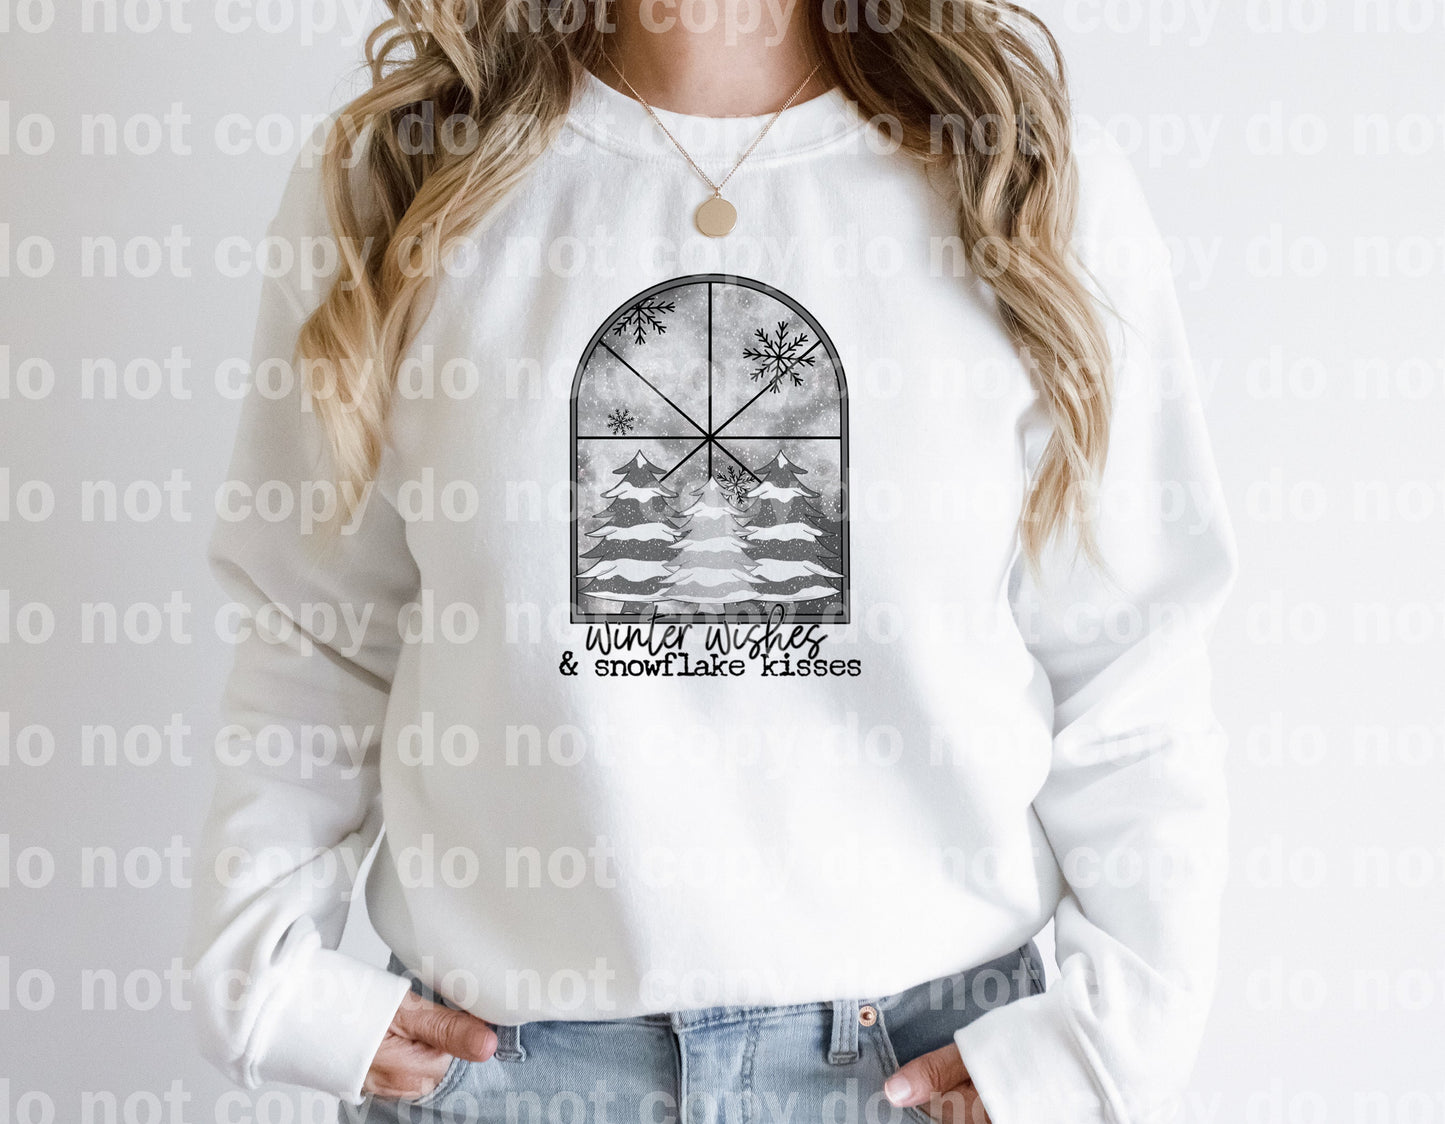 Winter Wishes Snowflake Kisses Glass Dream Print or Sublimation Print